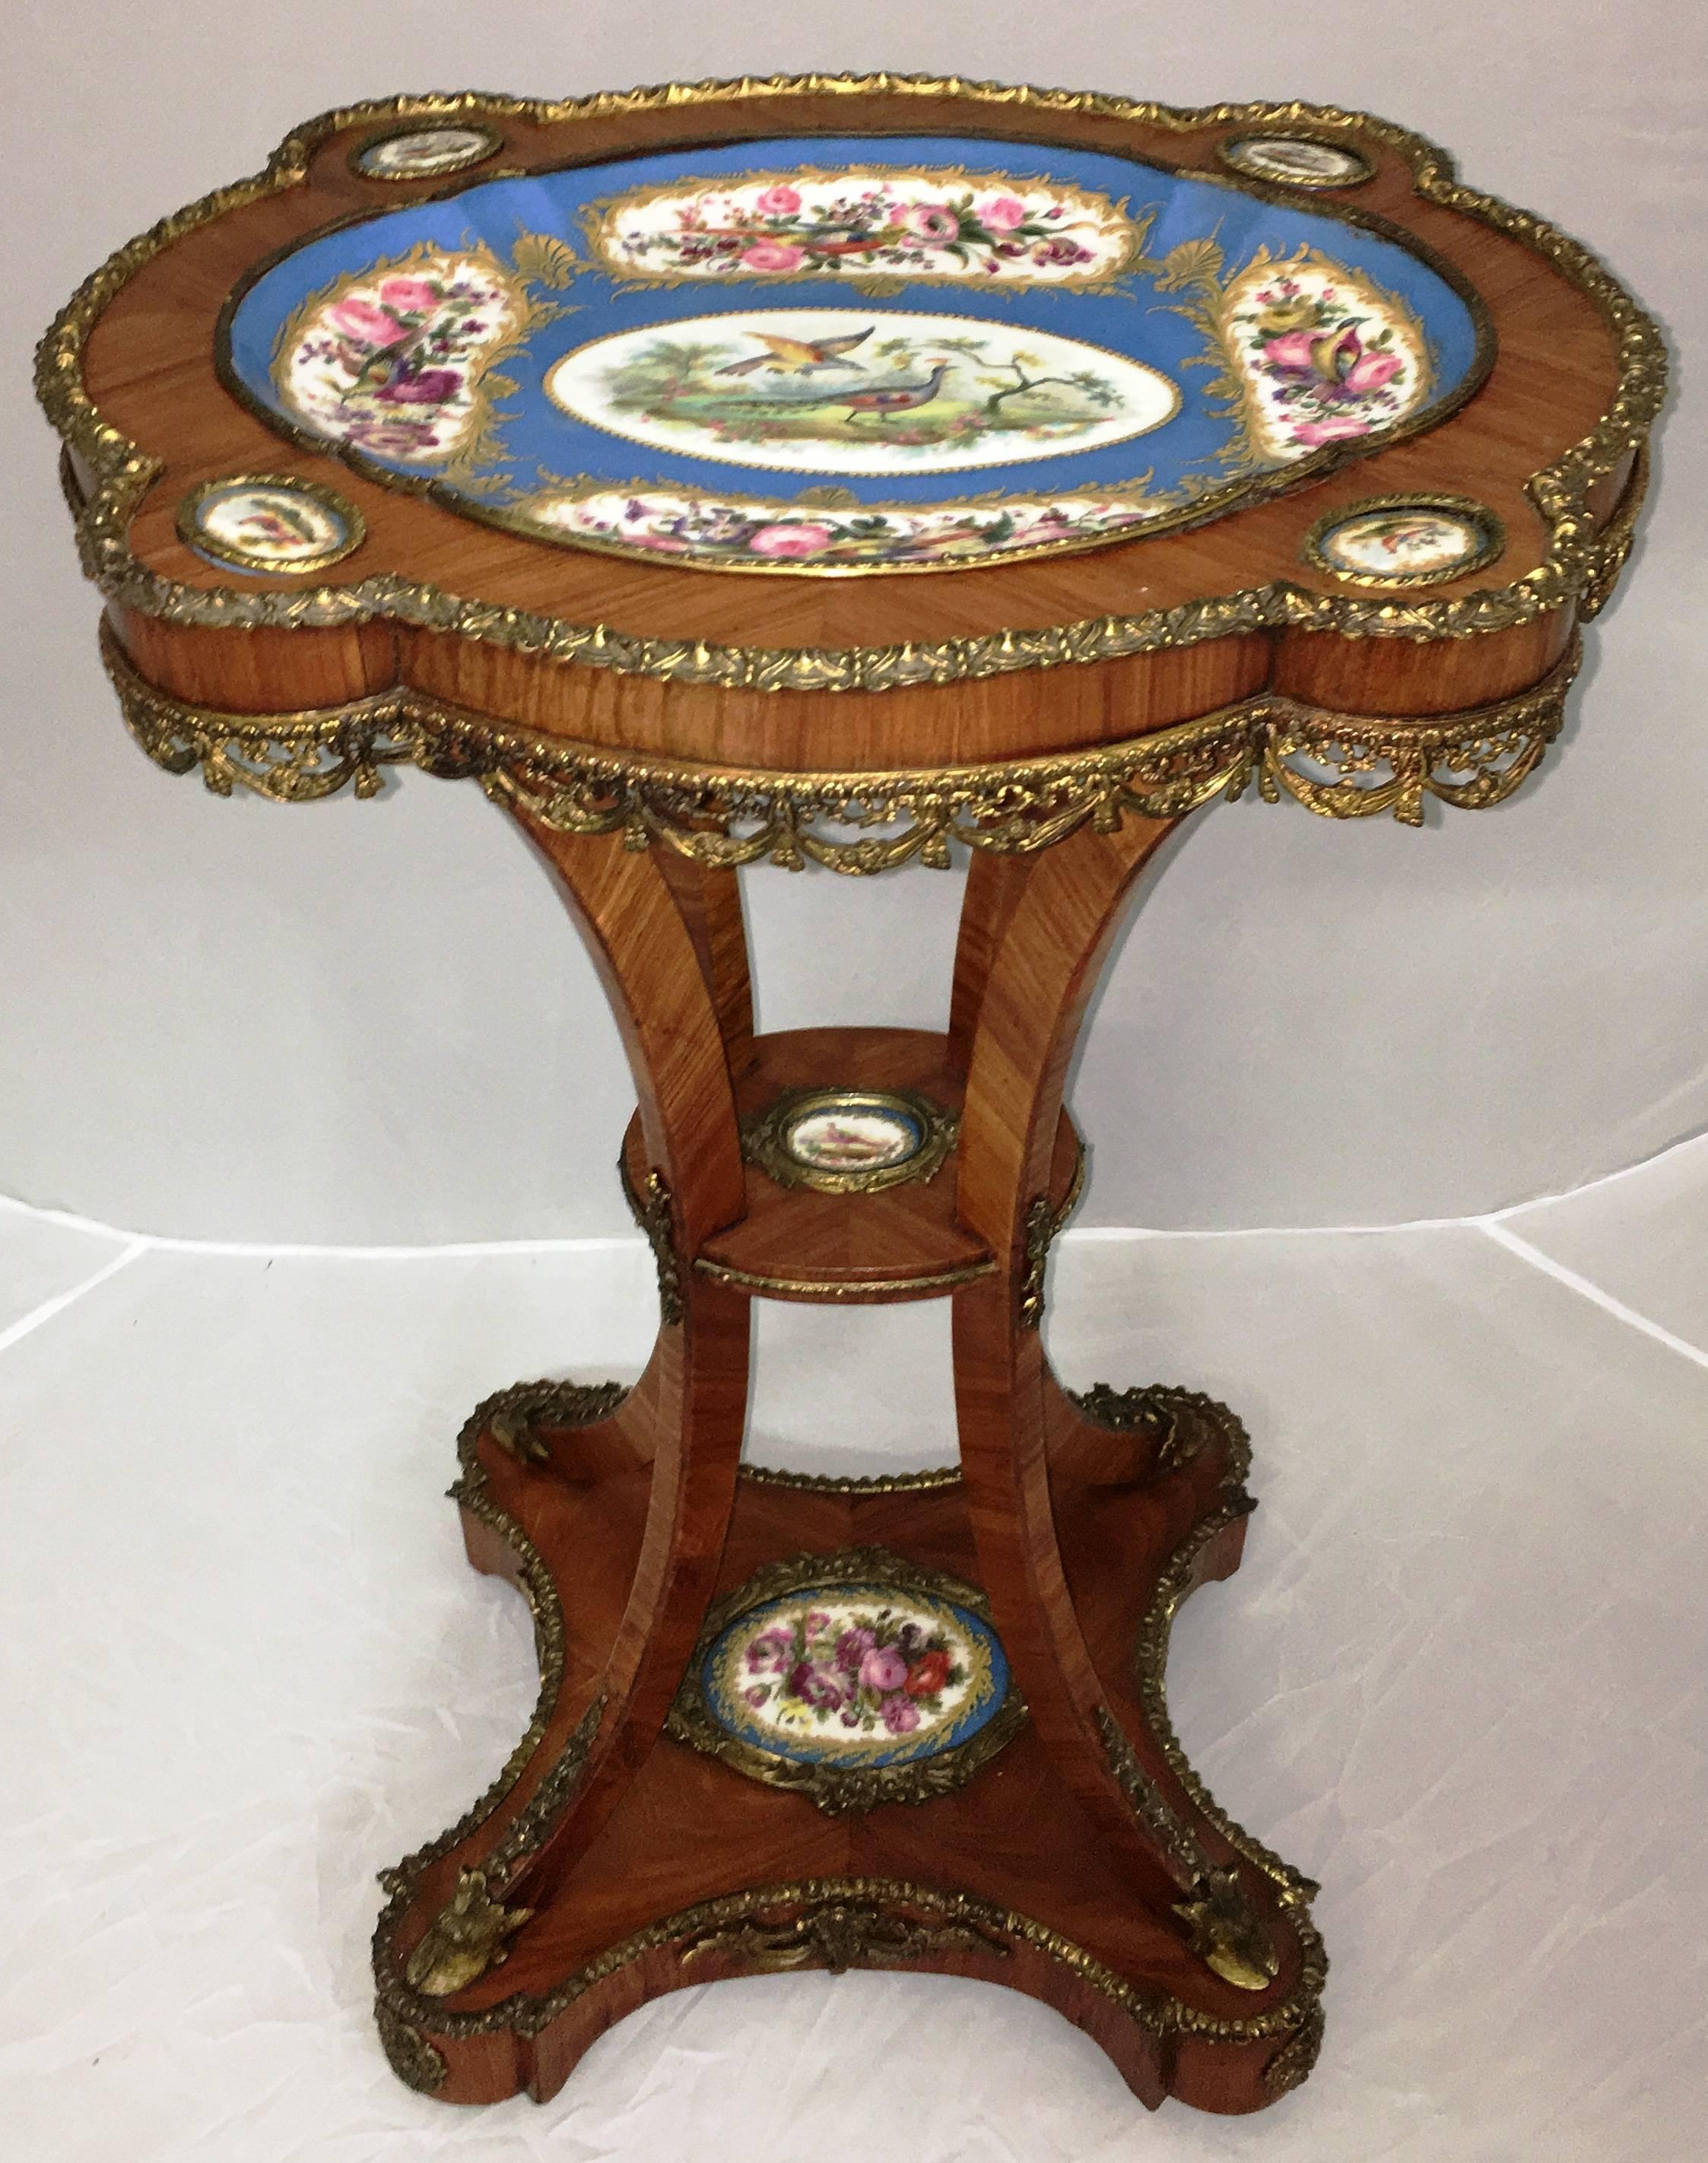 A very good quality near pair of French kingwood veneered, ormolu-mounted side tables, having 'Sevres porcelain plaques mounted and raised on out swept legs and a plinth base.